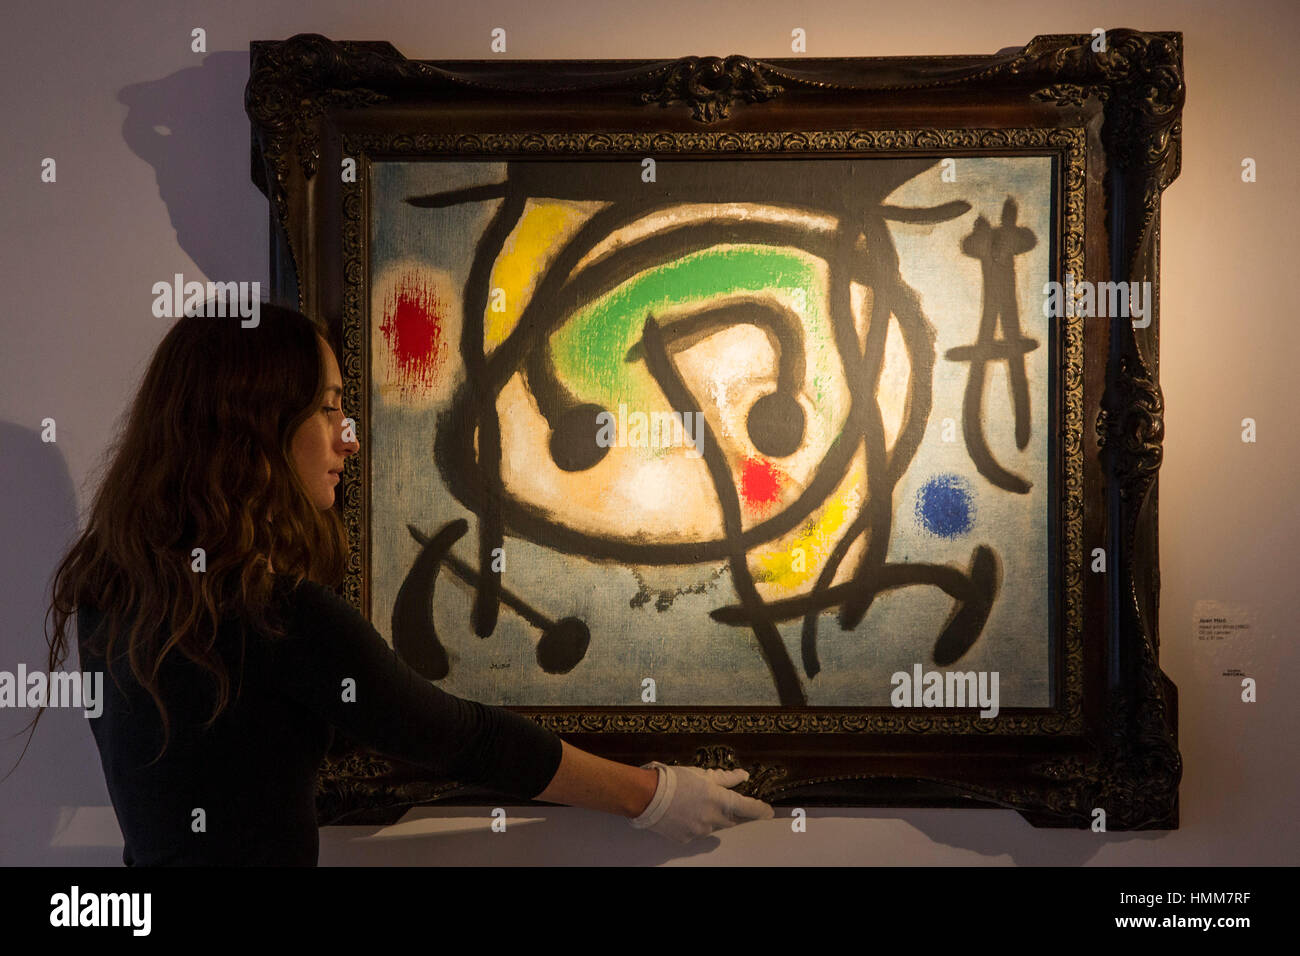 London, UK. 17 January 2017. Joan Miro, Head and Birds, 1962. Mayoral presents an exhibition inspired by the Spanish Pavilion at the 1937 Paris Exposition Internationaledes Arts et Techniques dans la Vie Moderne, commemorating 80 years since its inauguration. The original pavilion marked a crucial moment during the Spanish Civil War (1936-1939), with the Spanish Republic using it as a platform to demonstrate to the rest of the world the atrocities that were taking place in Spain. The exhibition runs from 18 January to 10 February 2017 at Mayoral gallery in St James's. Stock Photo